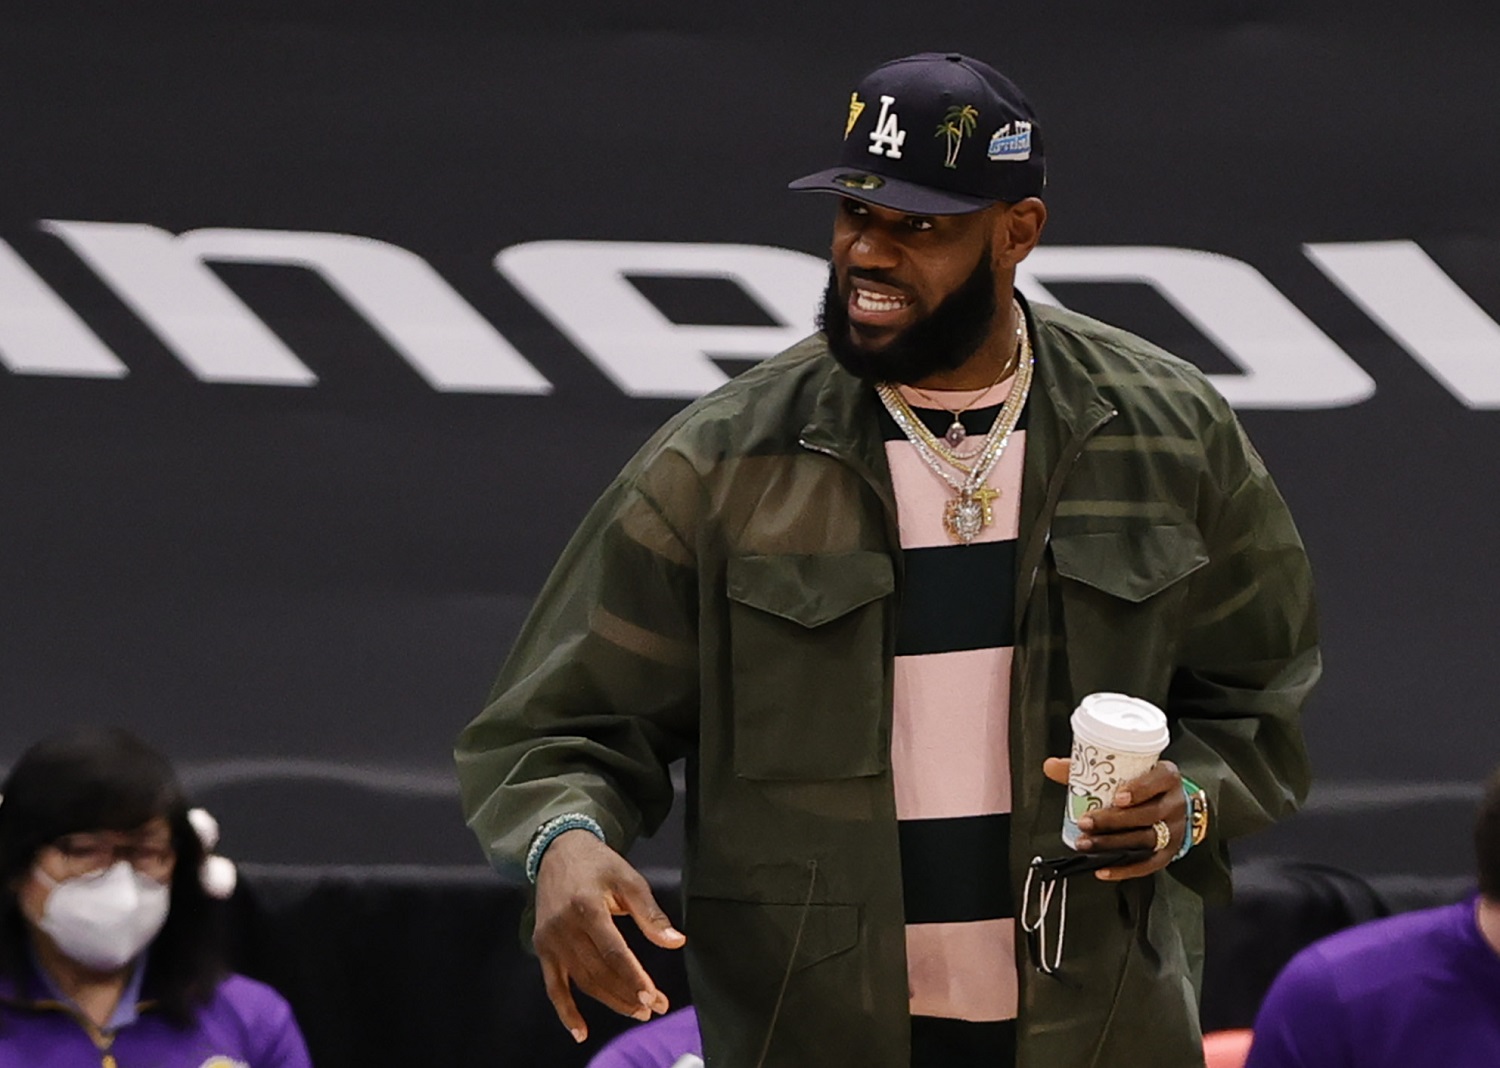 LeBron James has not played for the Los Angeles Lakers since suffering a high ankle sprain in mid-March during an NBA game.